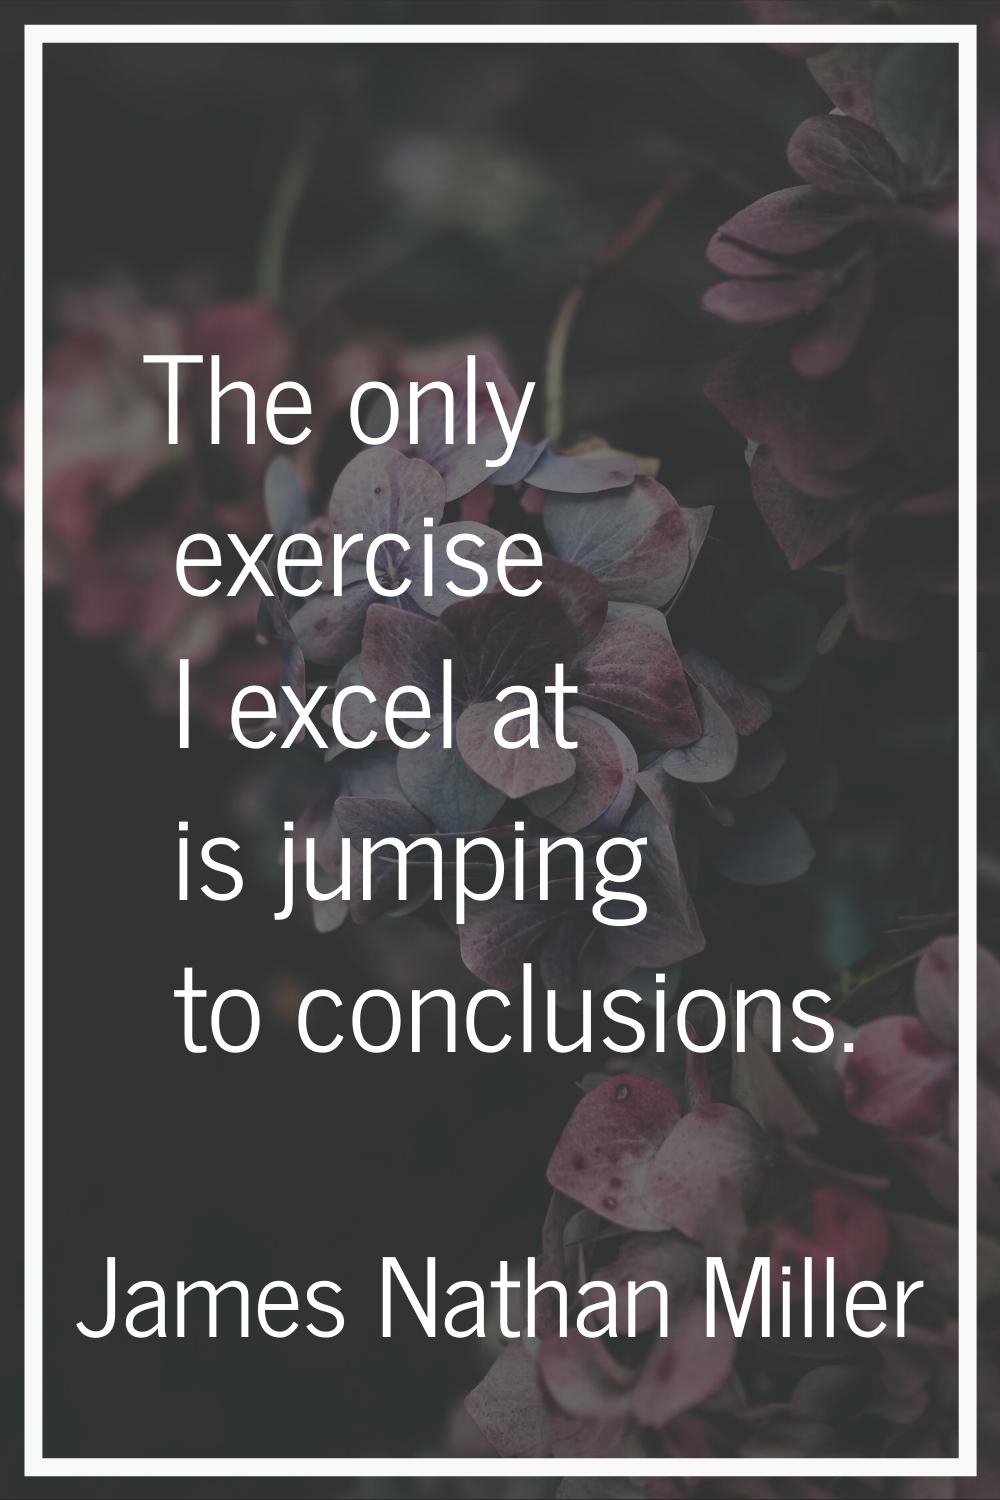 The only exercise I excel at is jumping to conclusions.